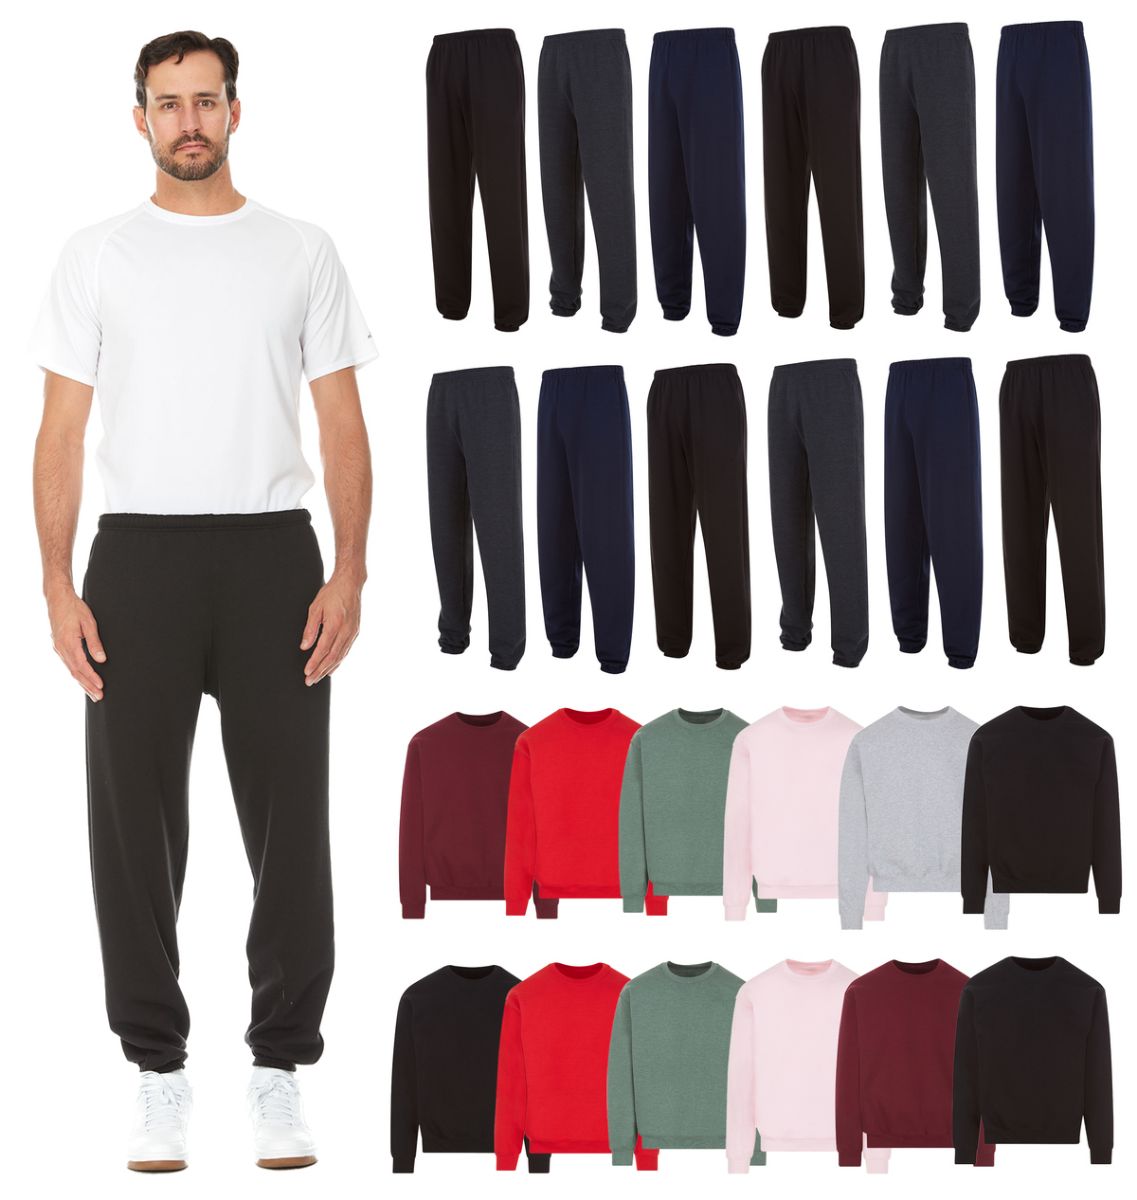 24 Pieces of Mix And Match Mens Fleece Jogger Pants And Crew Neck Sweatshirts Assorted Colors Size Small